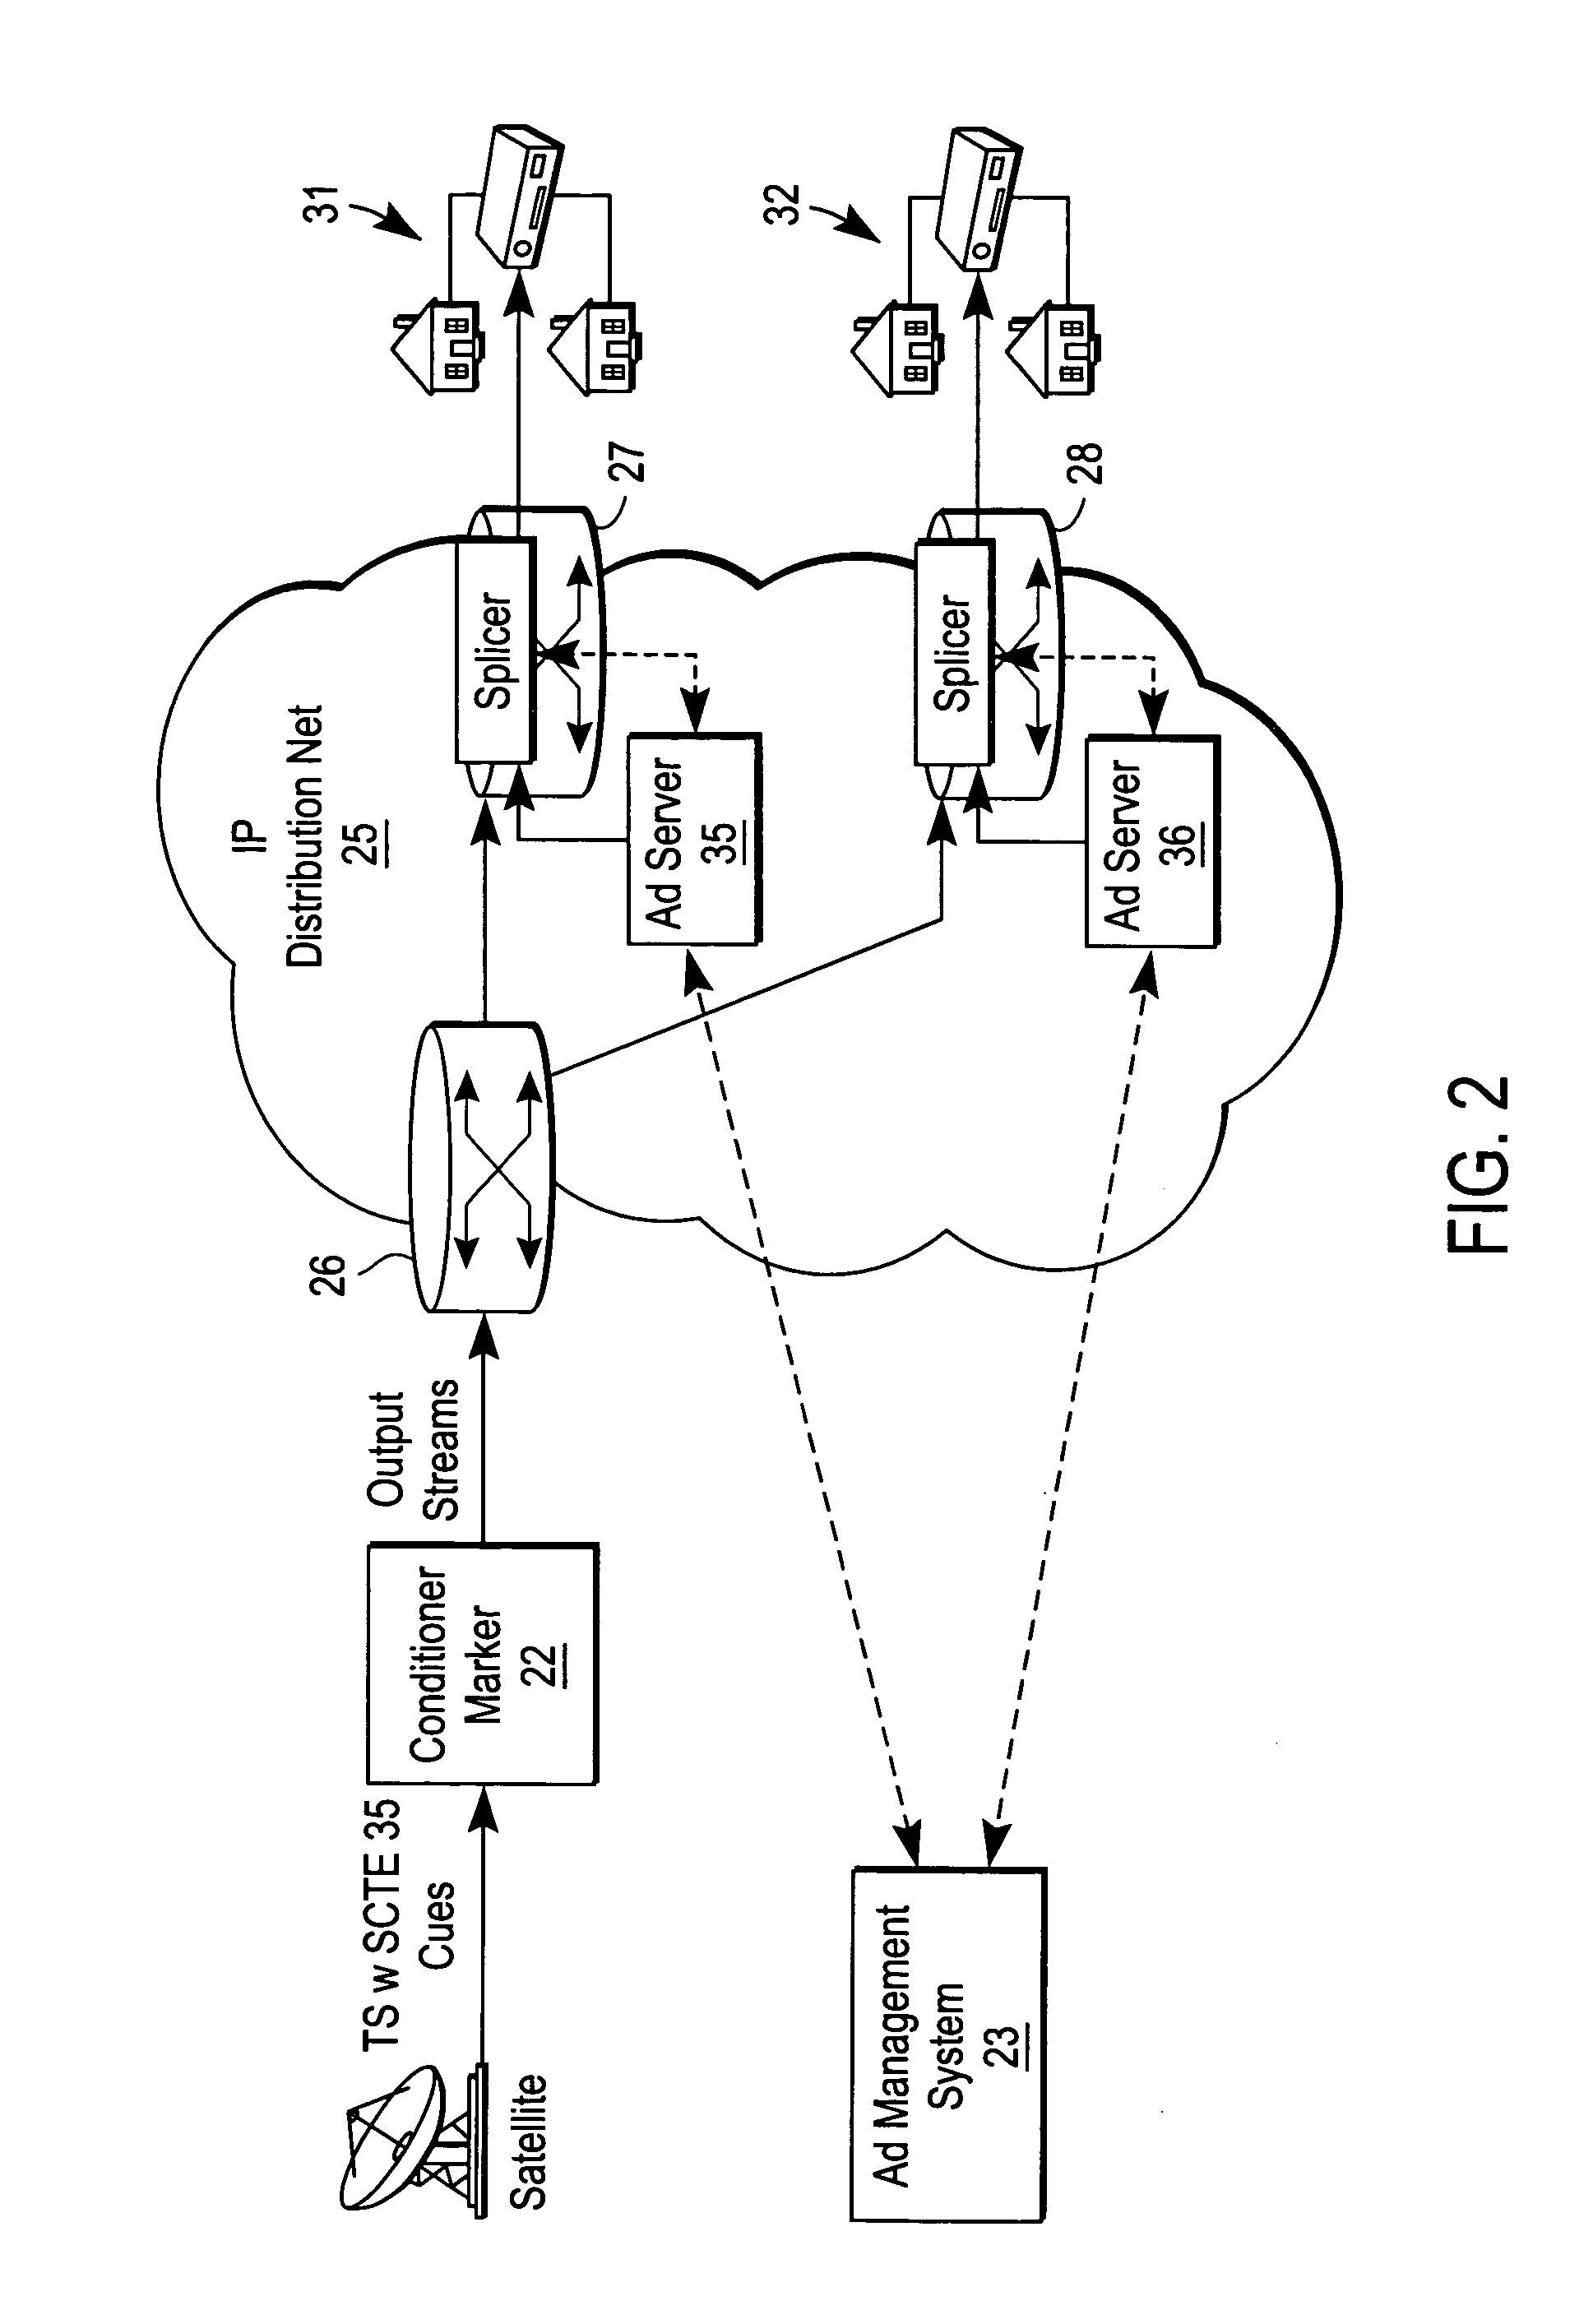 Distributed architecture for digital program insertion in video streams delivered over packet networks